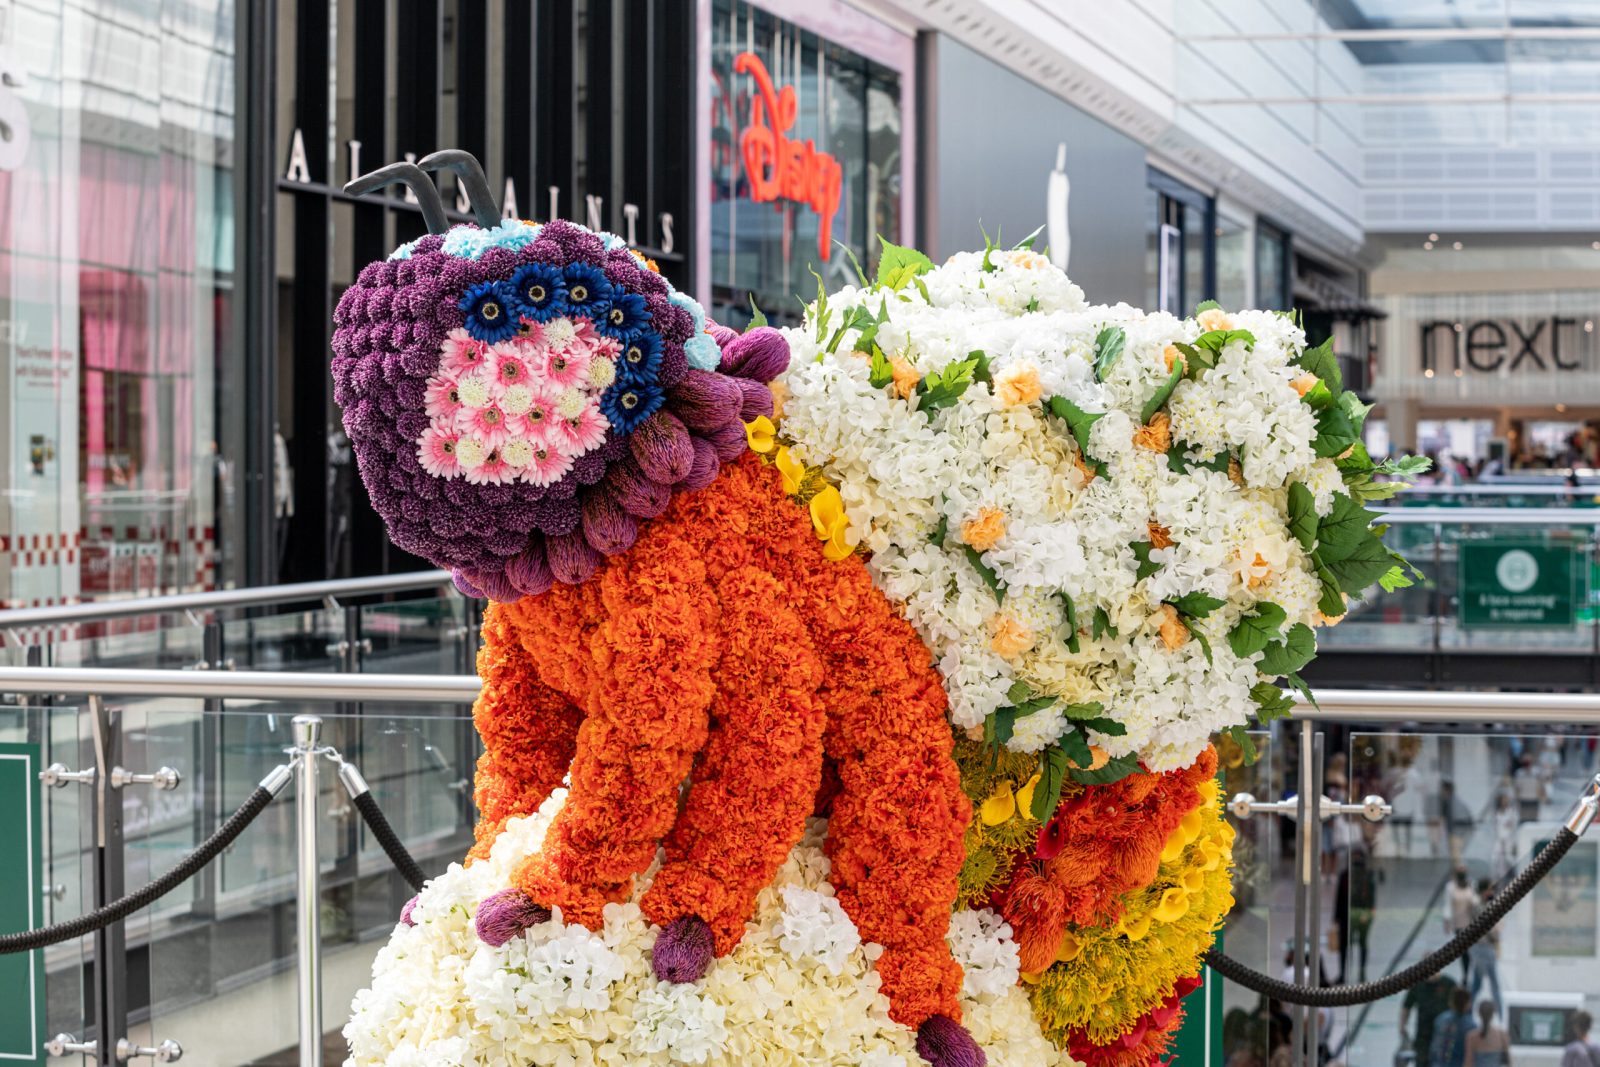 Incredible flower displays will take over Manchester on a Jubilee Trail next month, The Manc